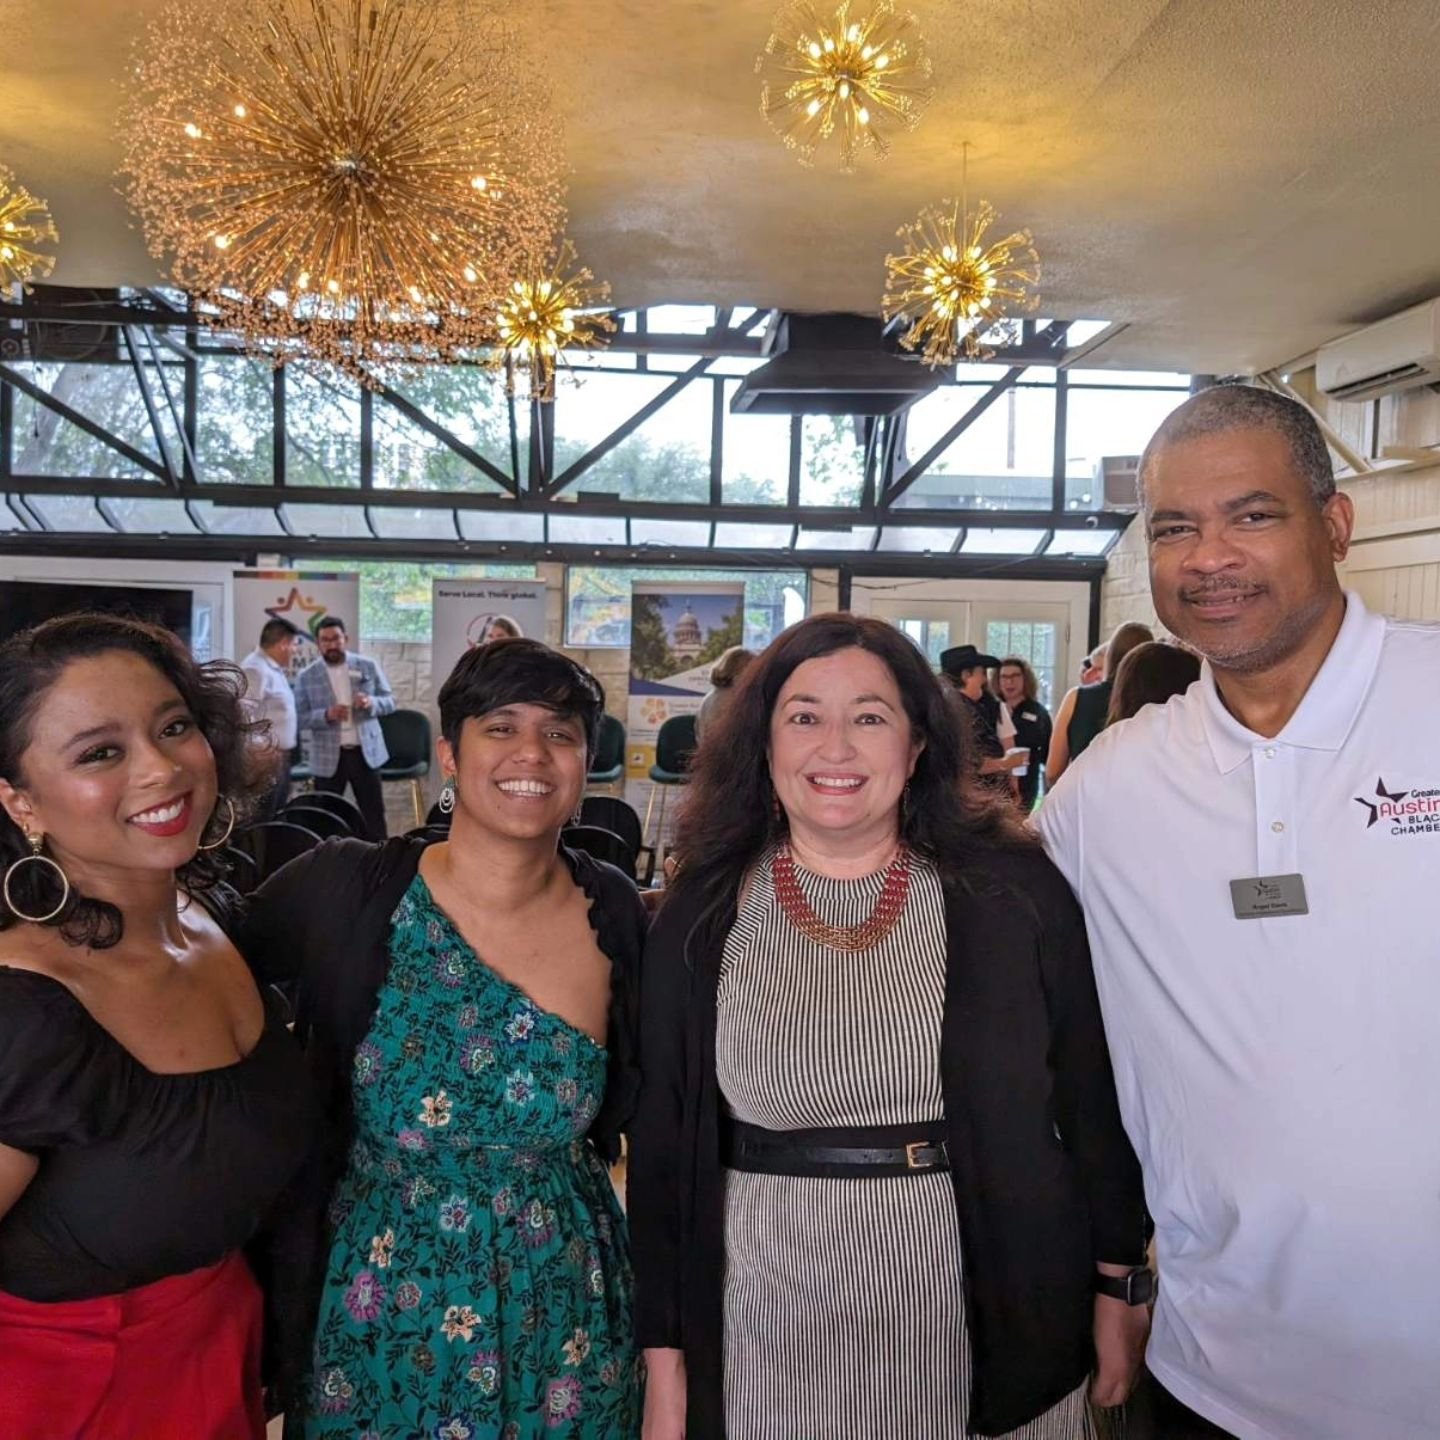 It was great to meet all these amazing entrepreneurs and local businesses at the Diversity Ethnic Chamber Alliance event yesterday @egbiofaustin @austingumbo_koop @collectedabundance . All four chambers are doing amazing work supporting small busines